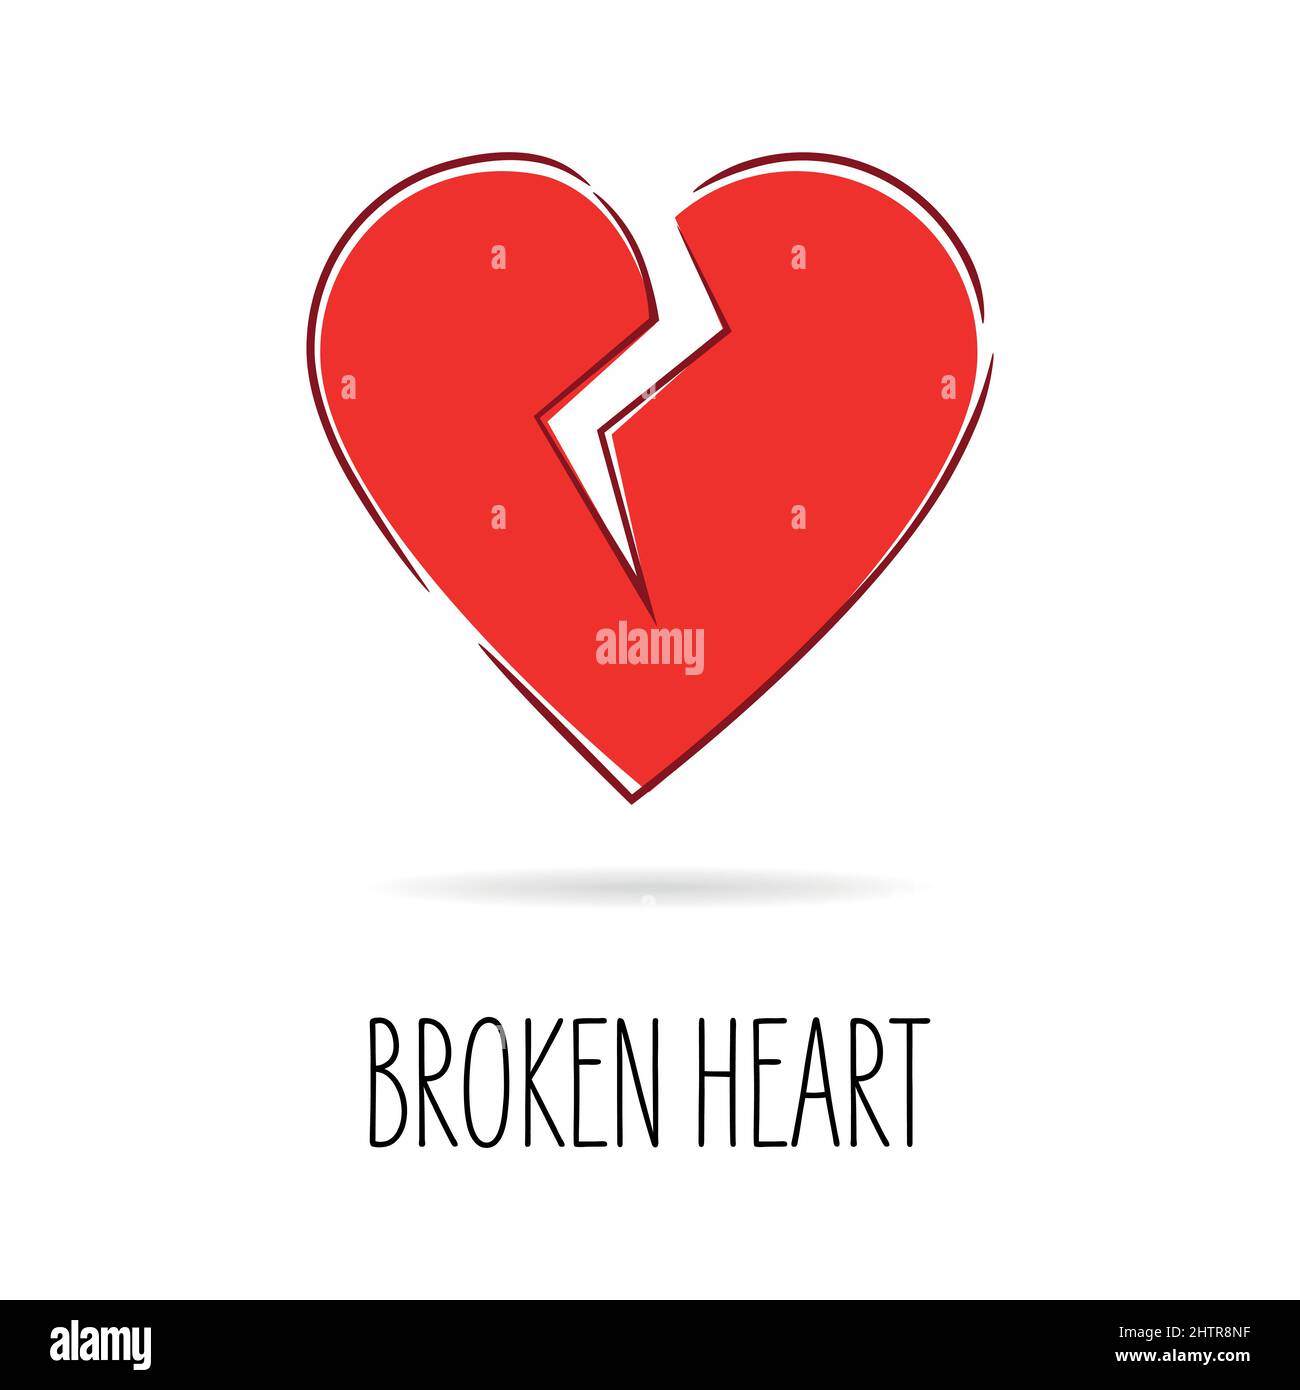 Broken Heart - Heart Icon with shadow and text on a white background Stock Vector